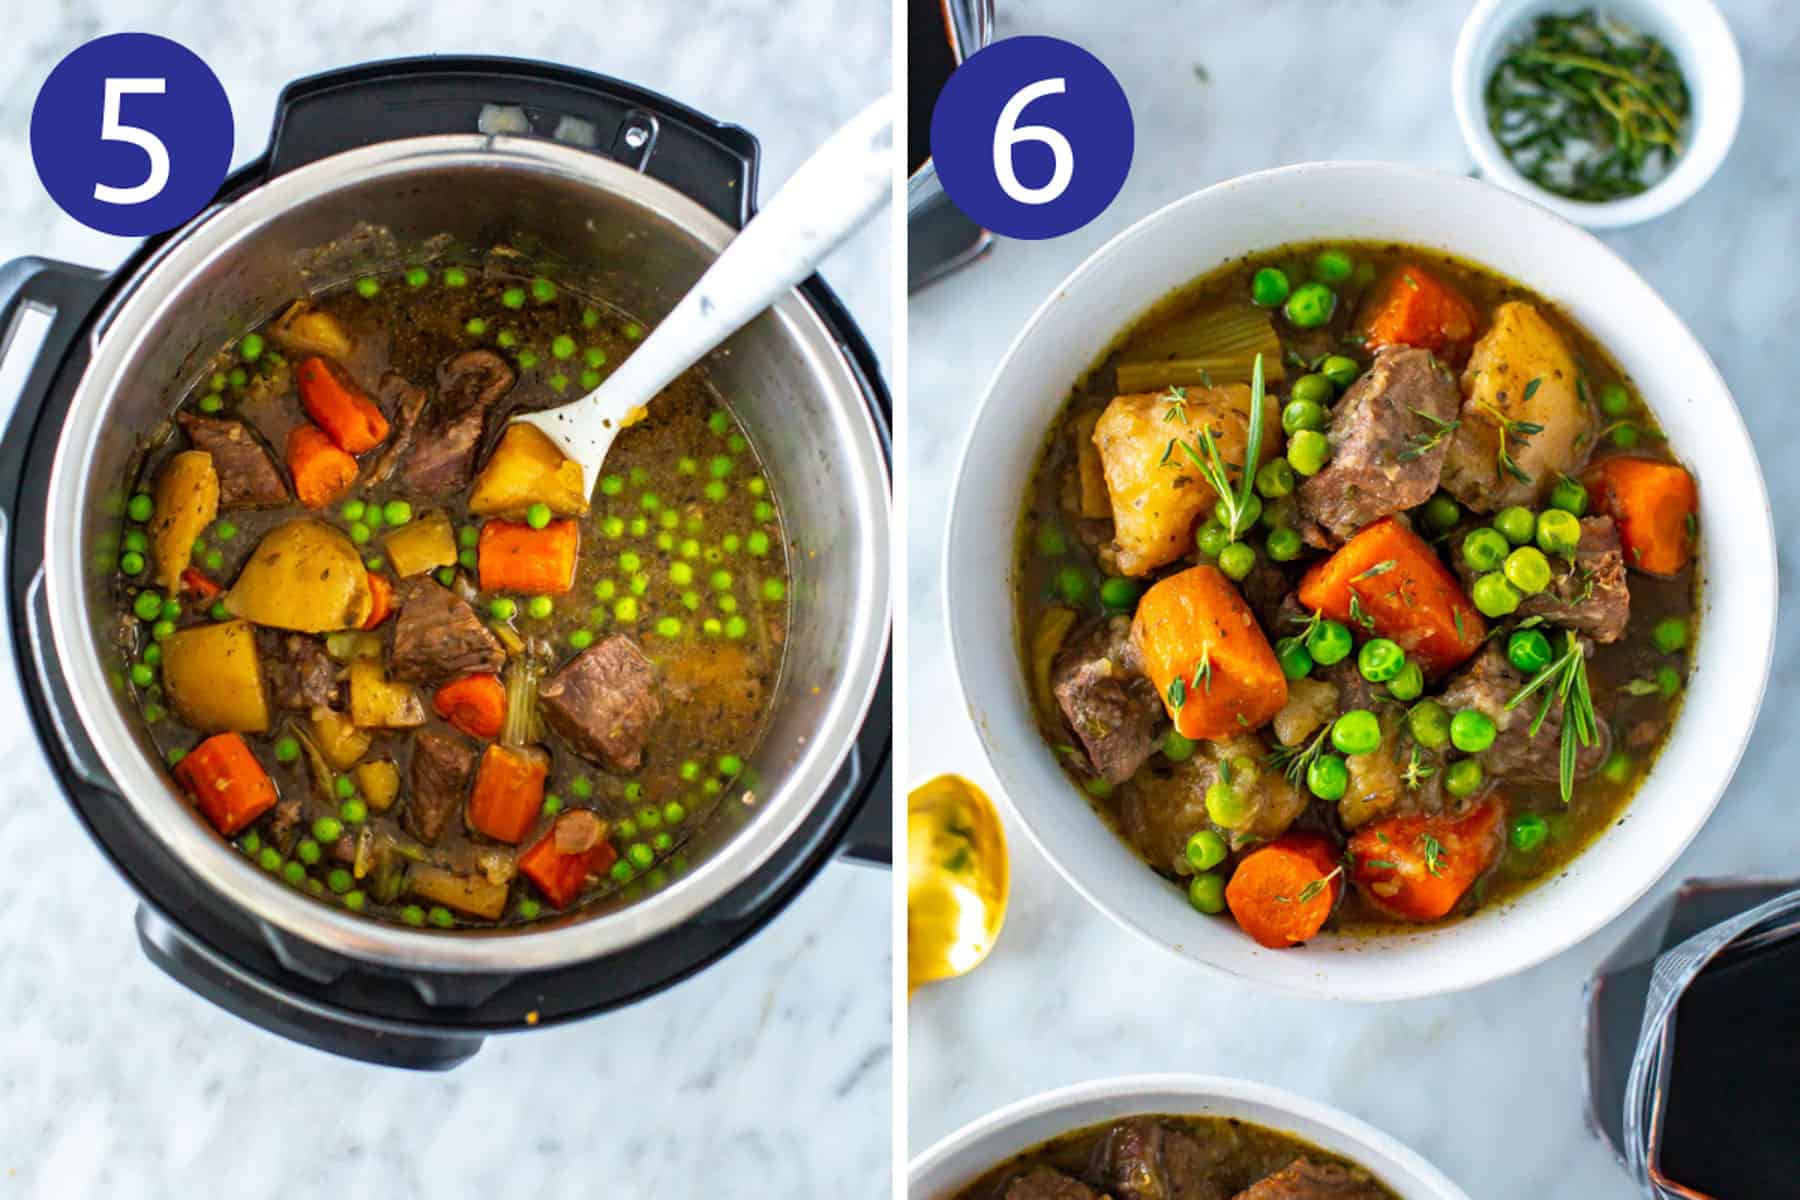 Steps 5 and 6 for making Instant Pot beef stew: Make gravy thicker with a cornstarch slurry then serve and garnish with herbs.